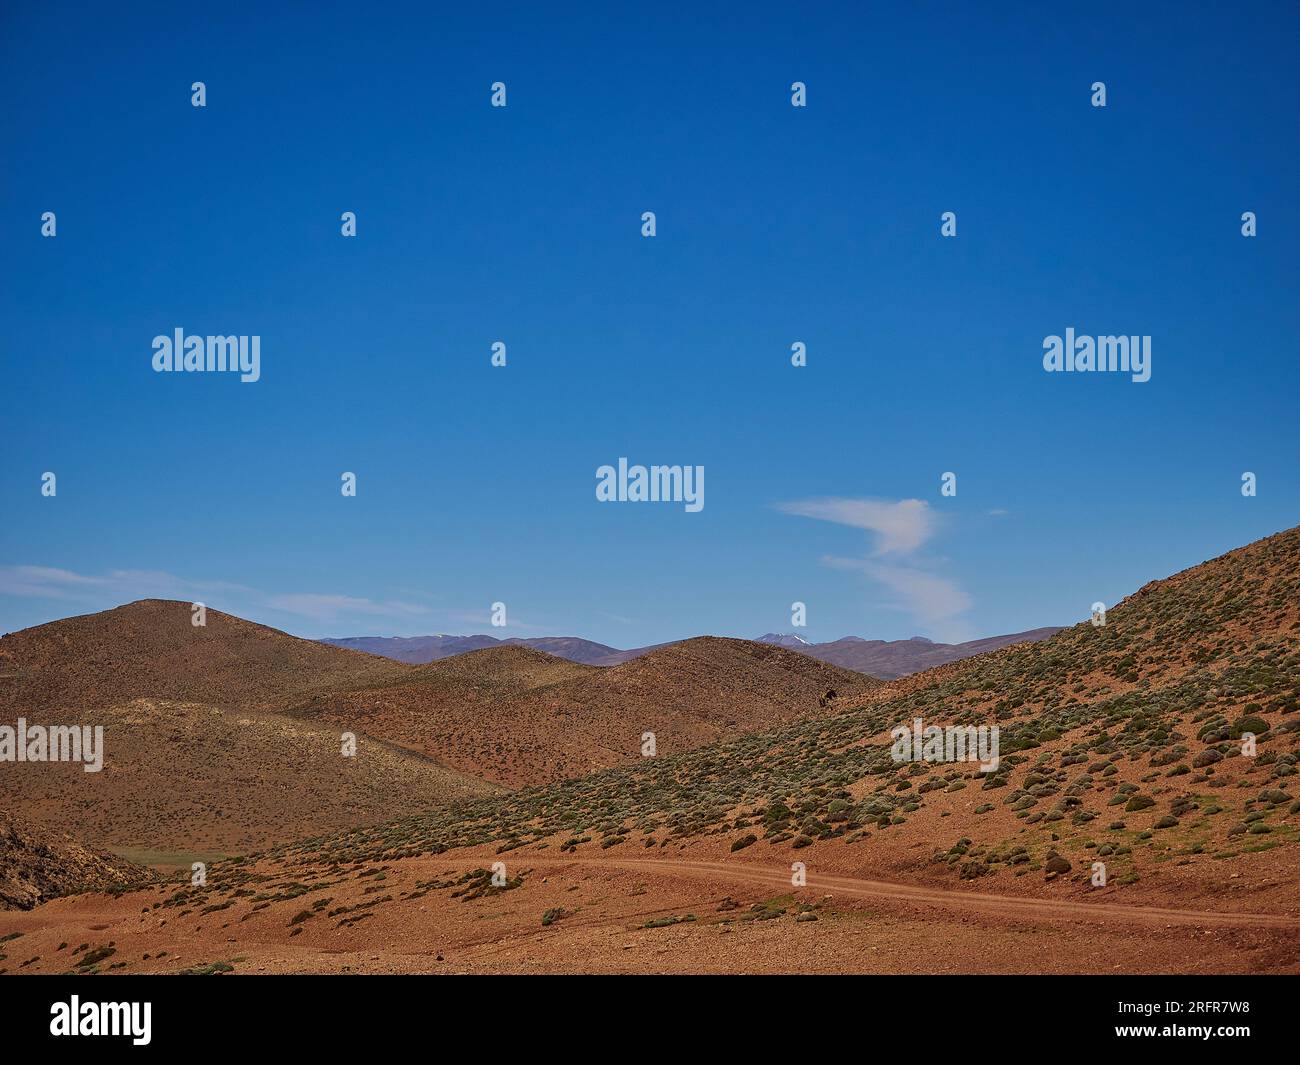 Dry and arid deserted region in a desert landscape in the mountains of Morocco in northern Africa. Stock Photo